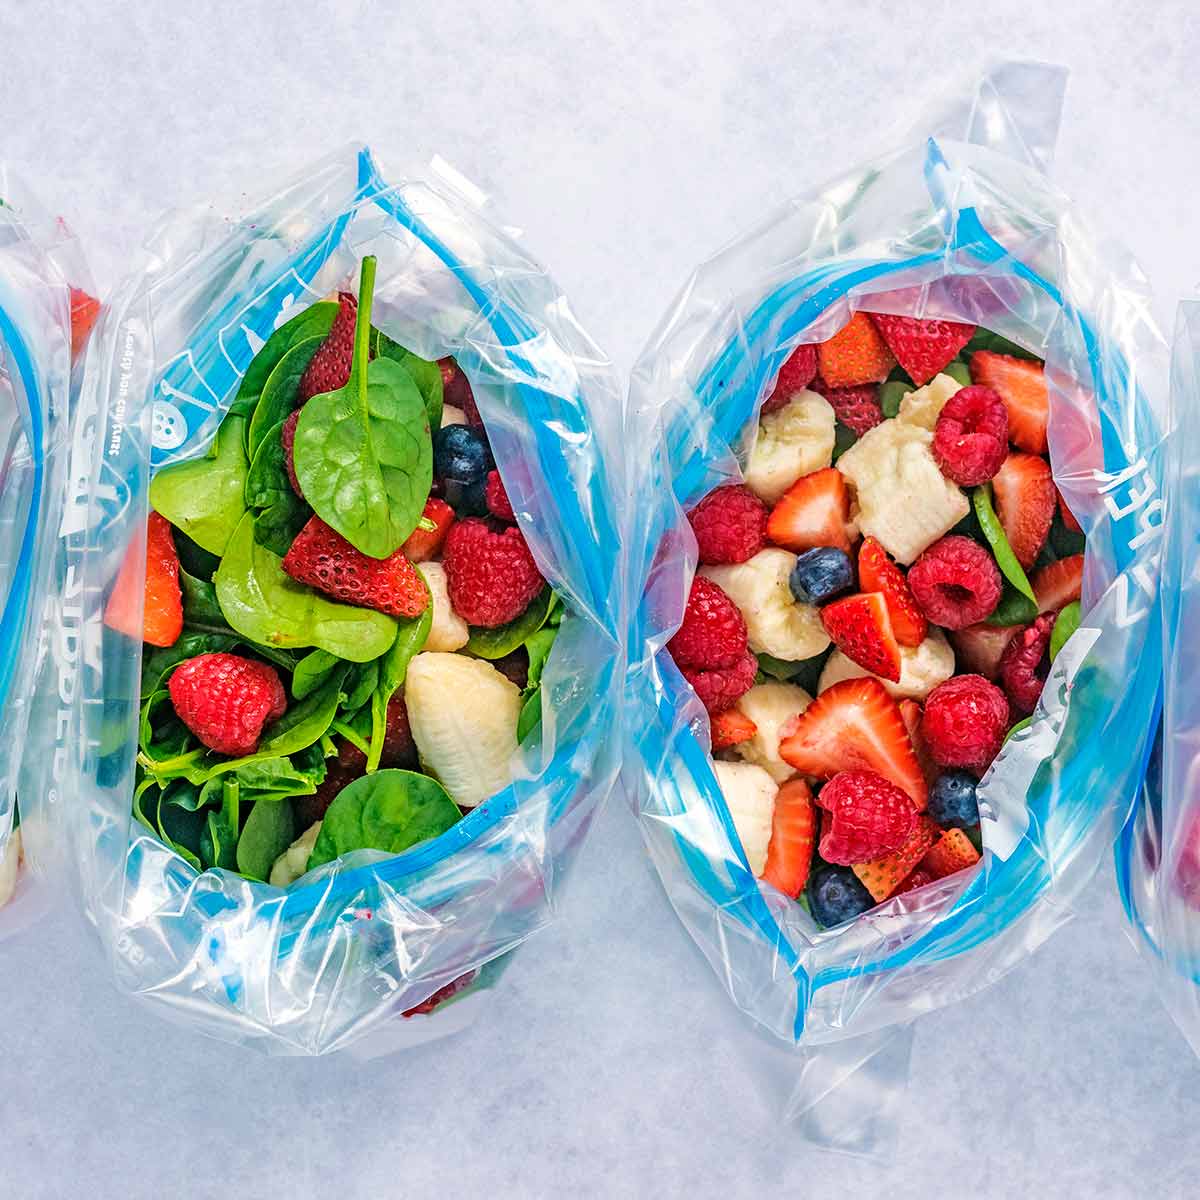 https://hungryhealthyhappy.com/wp-content/uploads/2022/05/Make-Ahead-Smoothie-Packs-featured.jpg